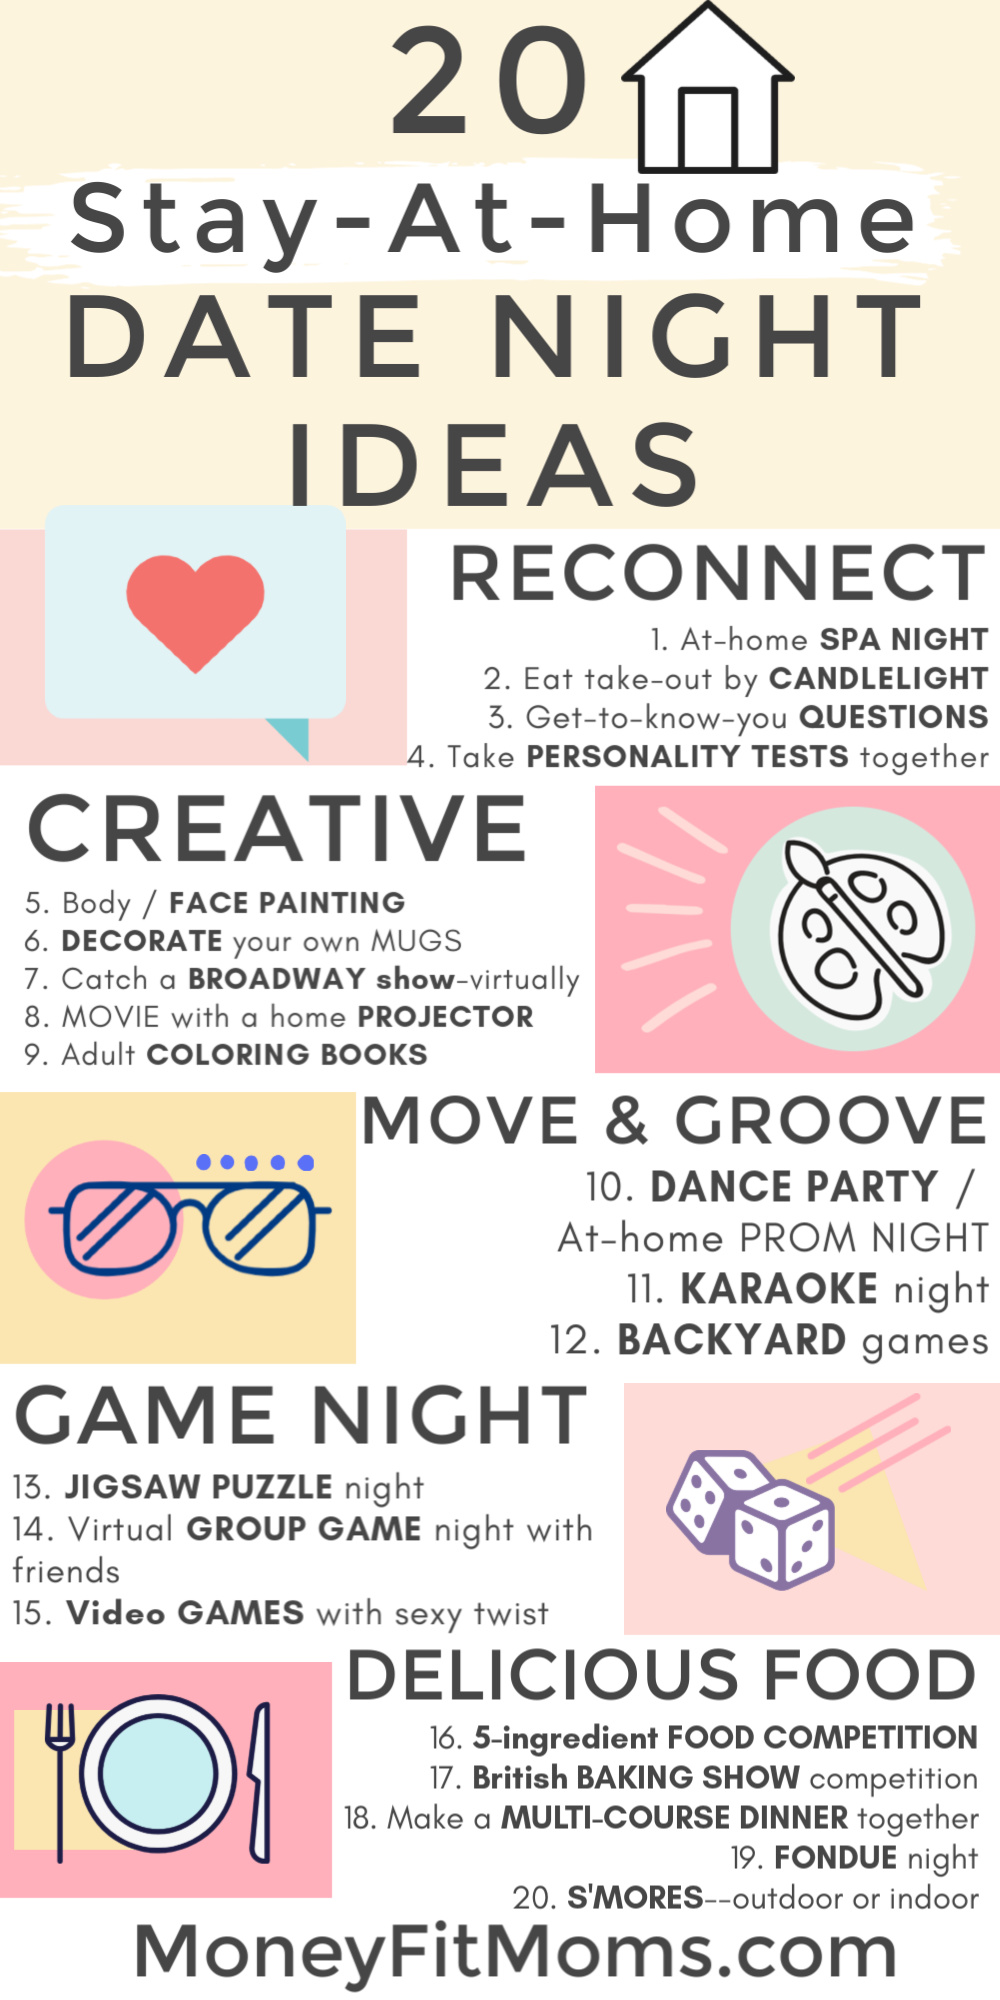 20 stay-at-home date night ideas